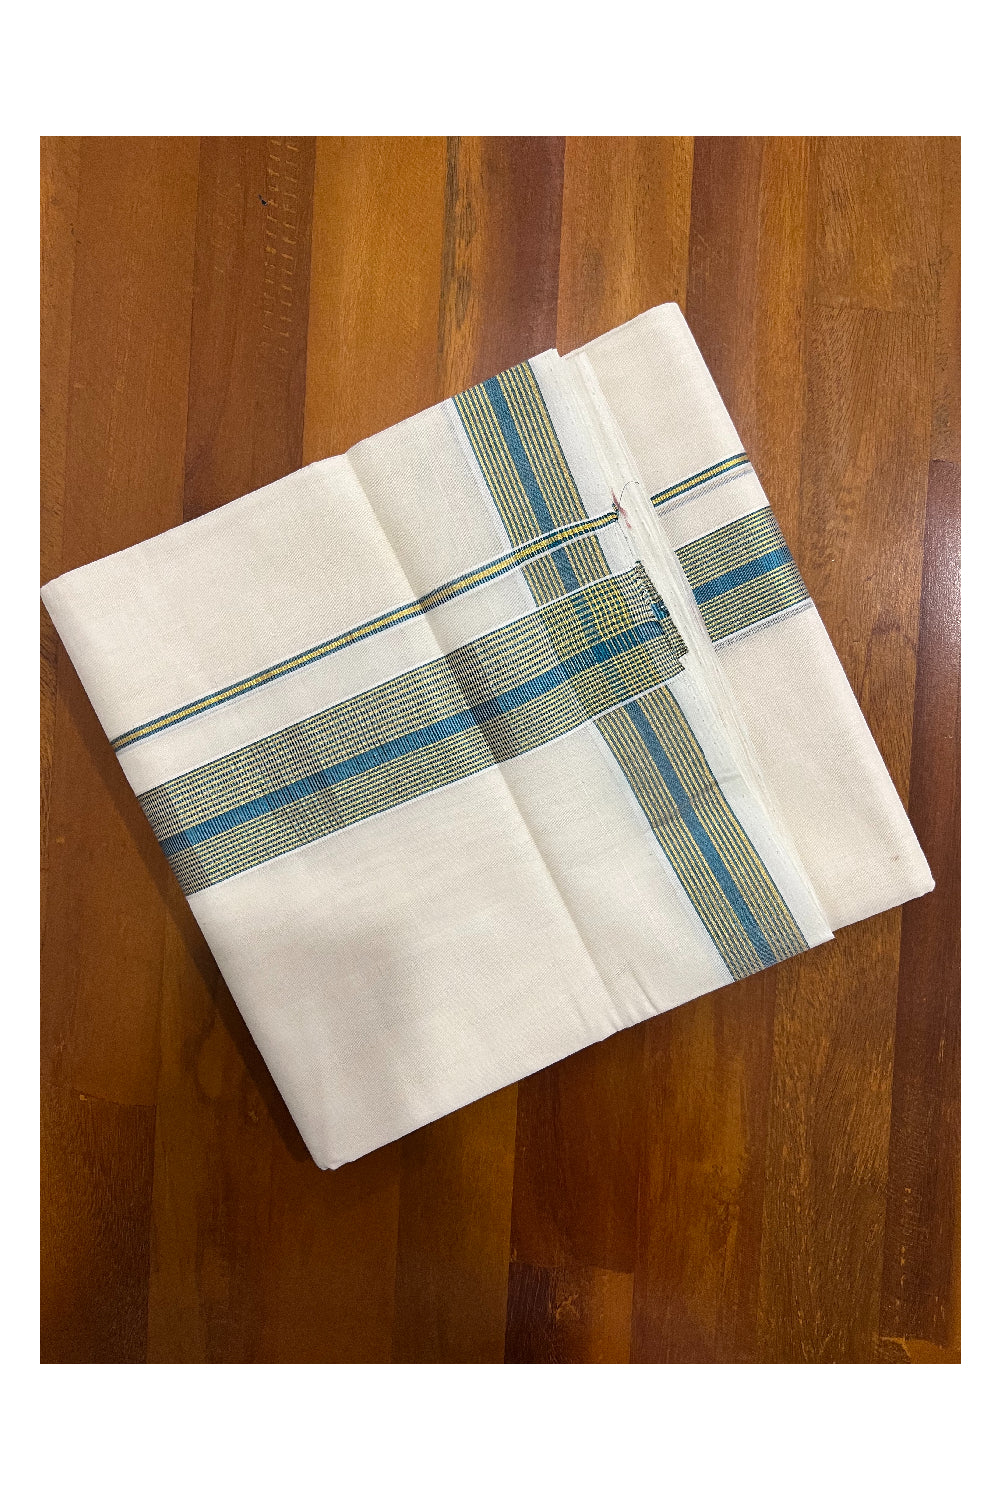 Southloom Kuthampully Handloom Pure Cotton Mundu with Golden and Teal Blue Kasavu Border (South Indian Dhoti)